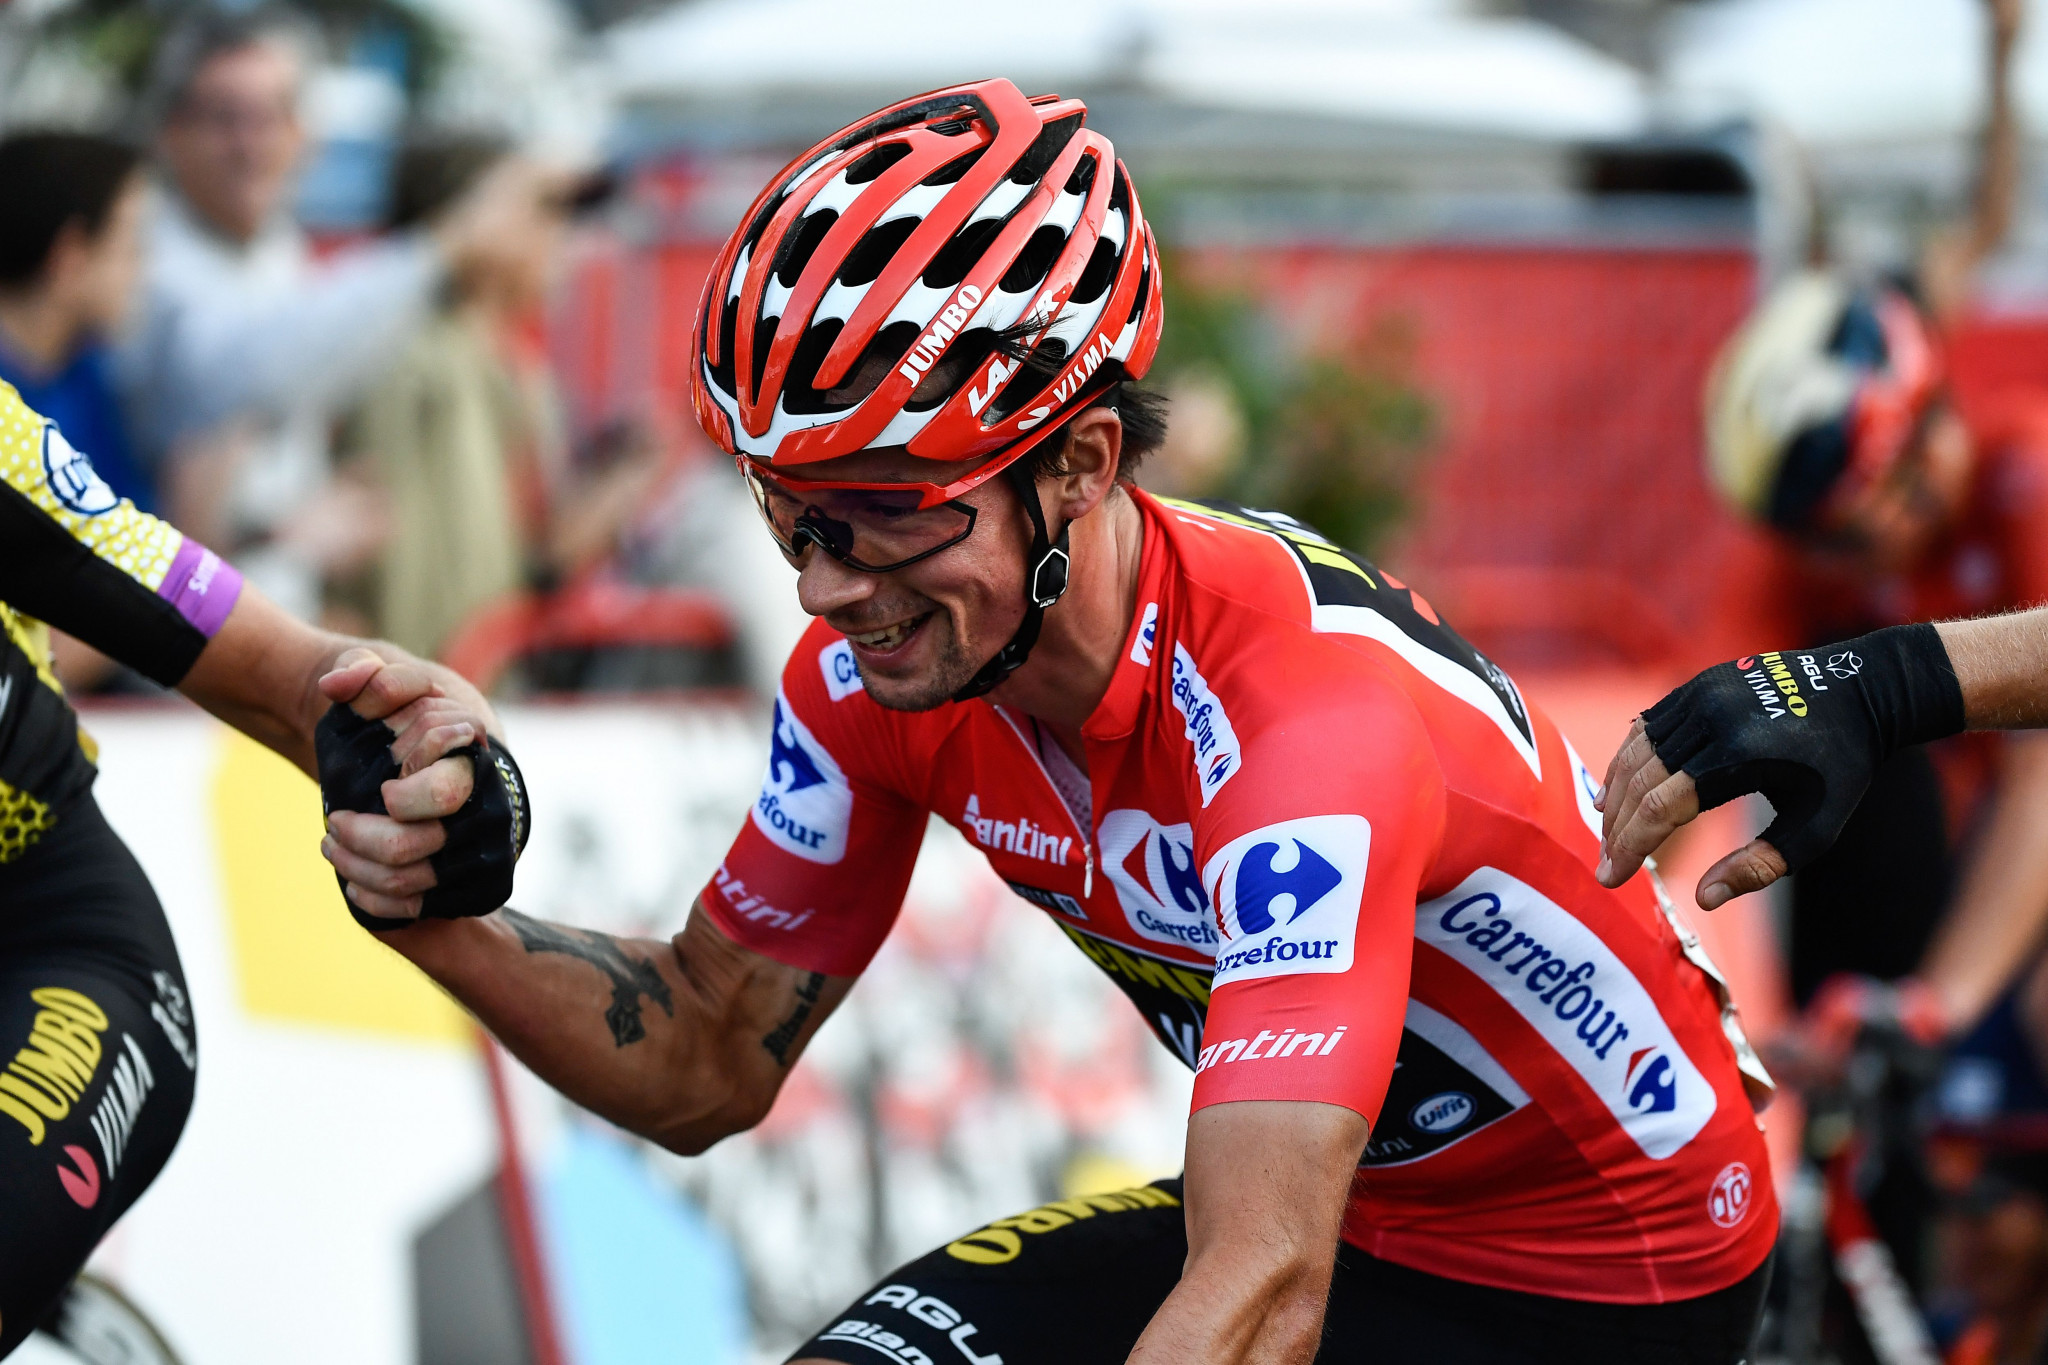 Roglič secures first Grand Tour title with victory at Vuelta a España